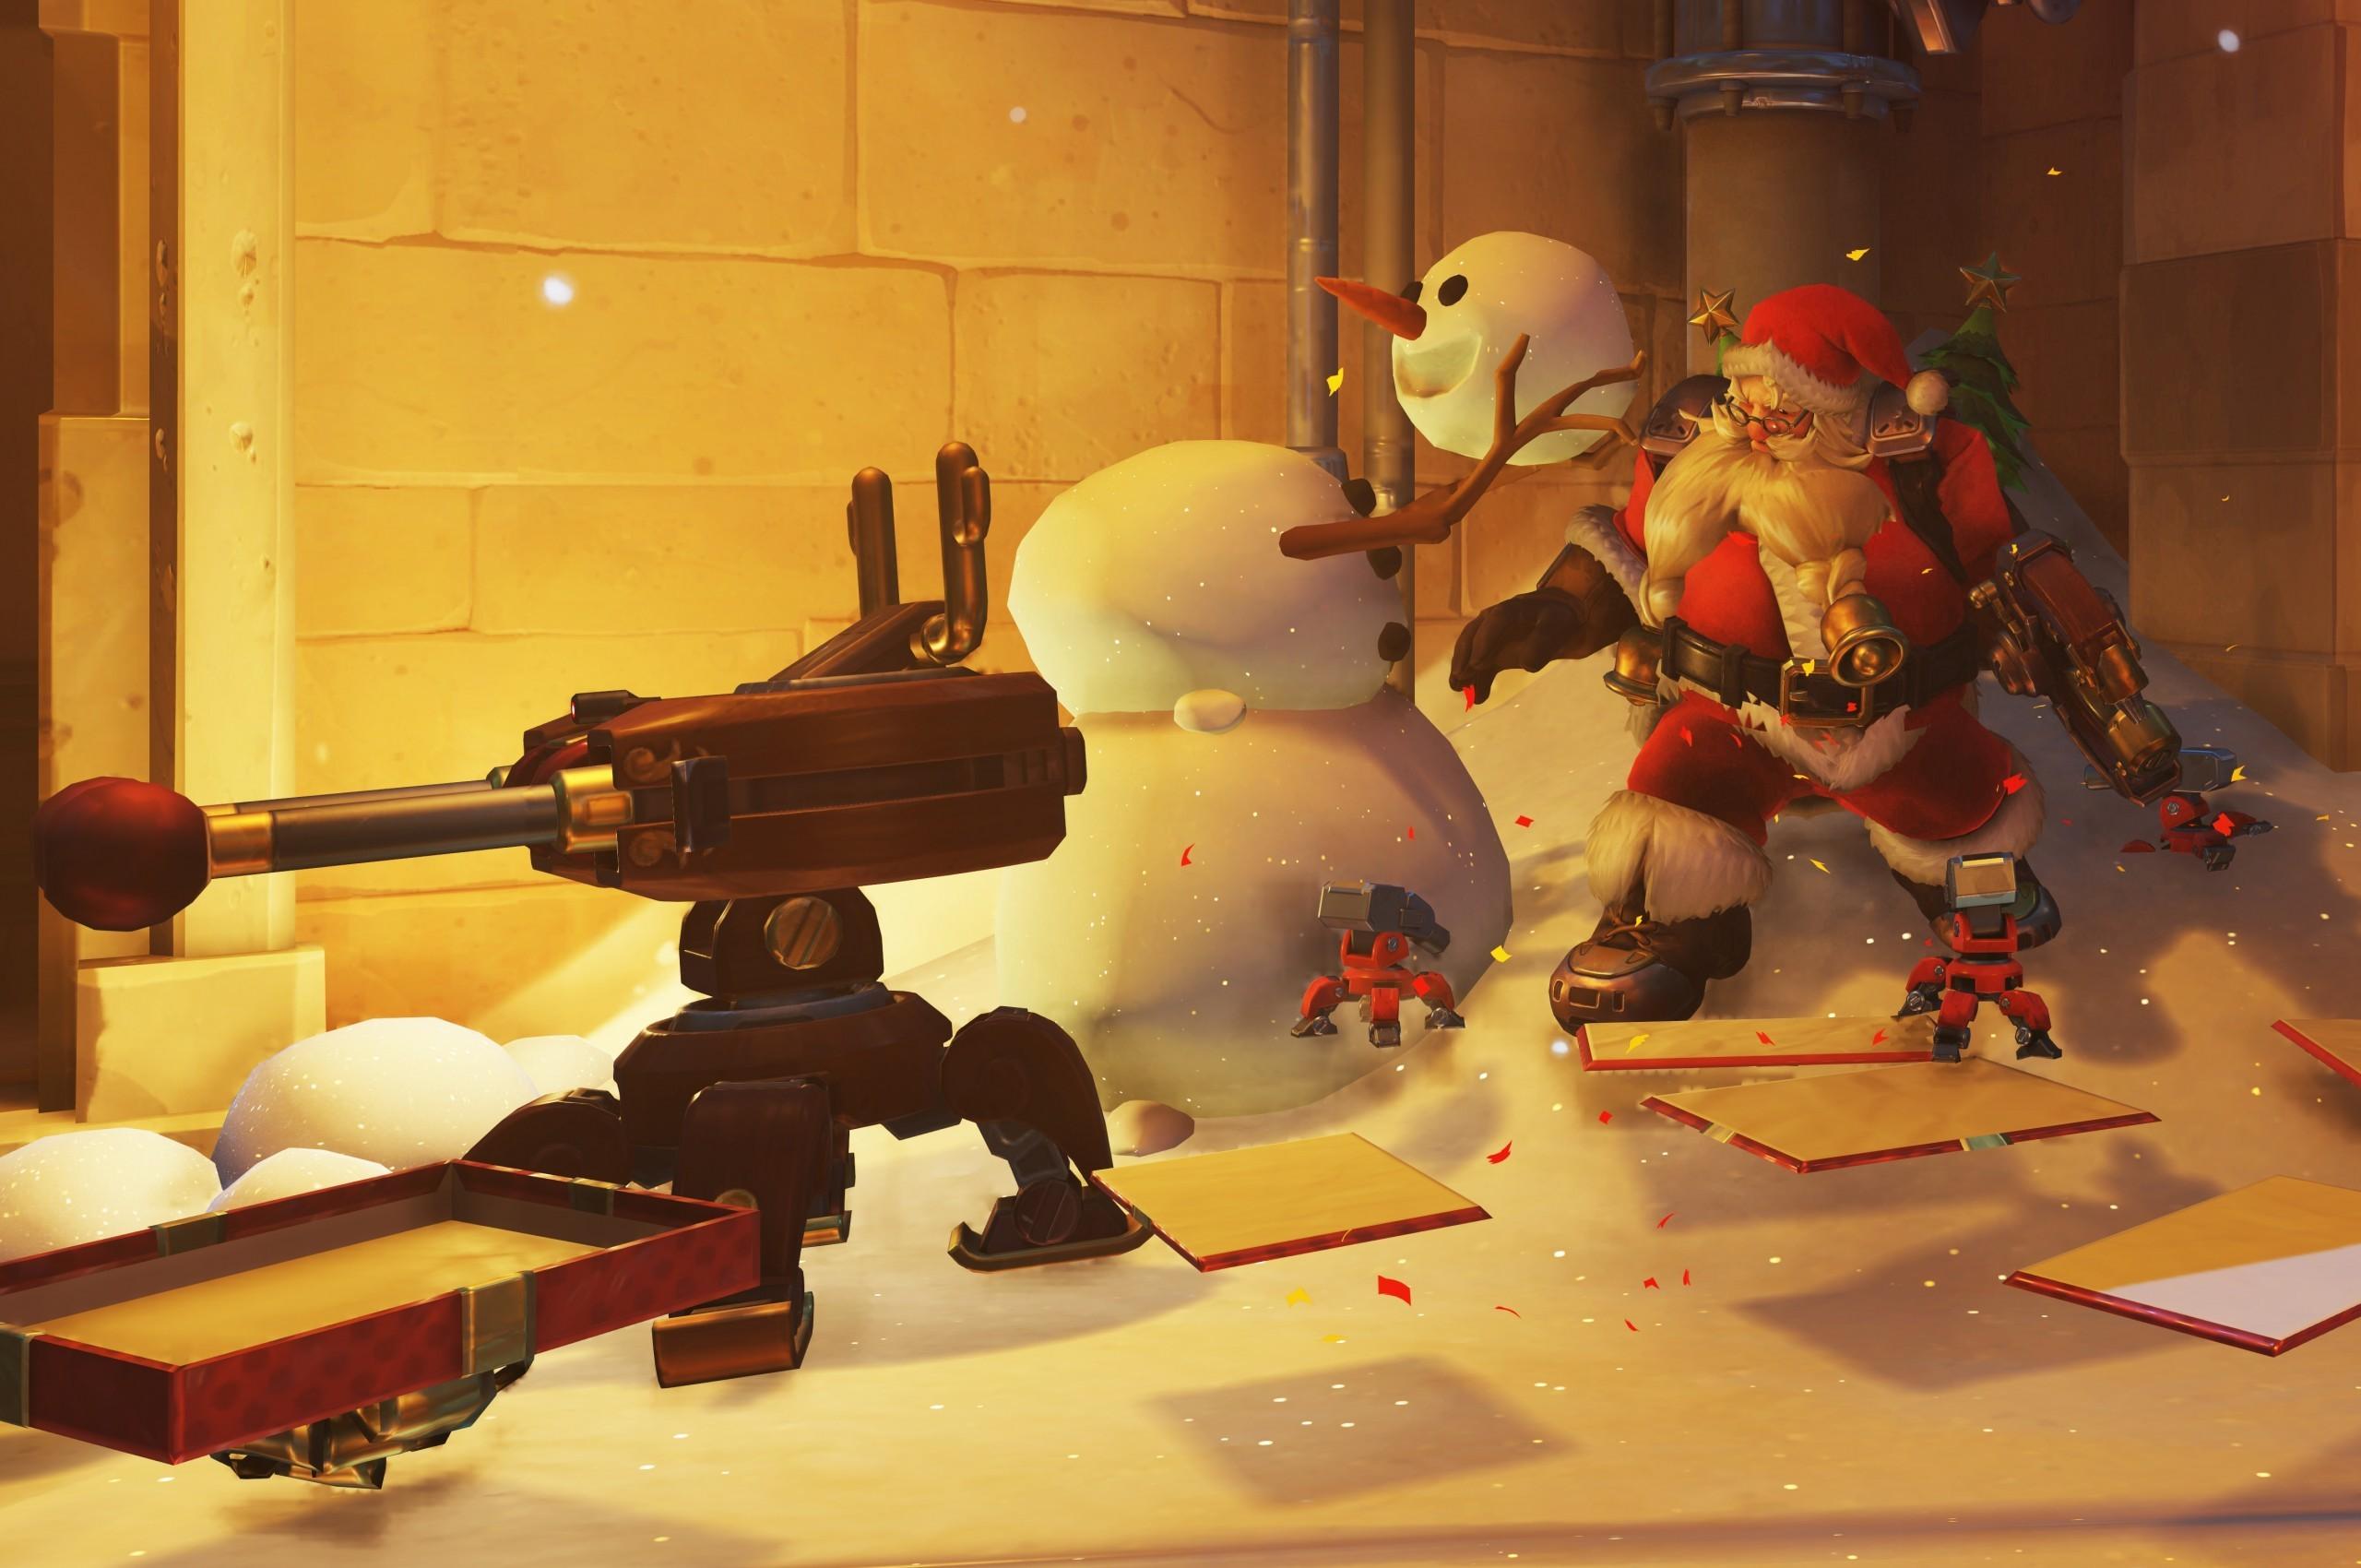 overwatch christmas wallpapers Wallpapers